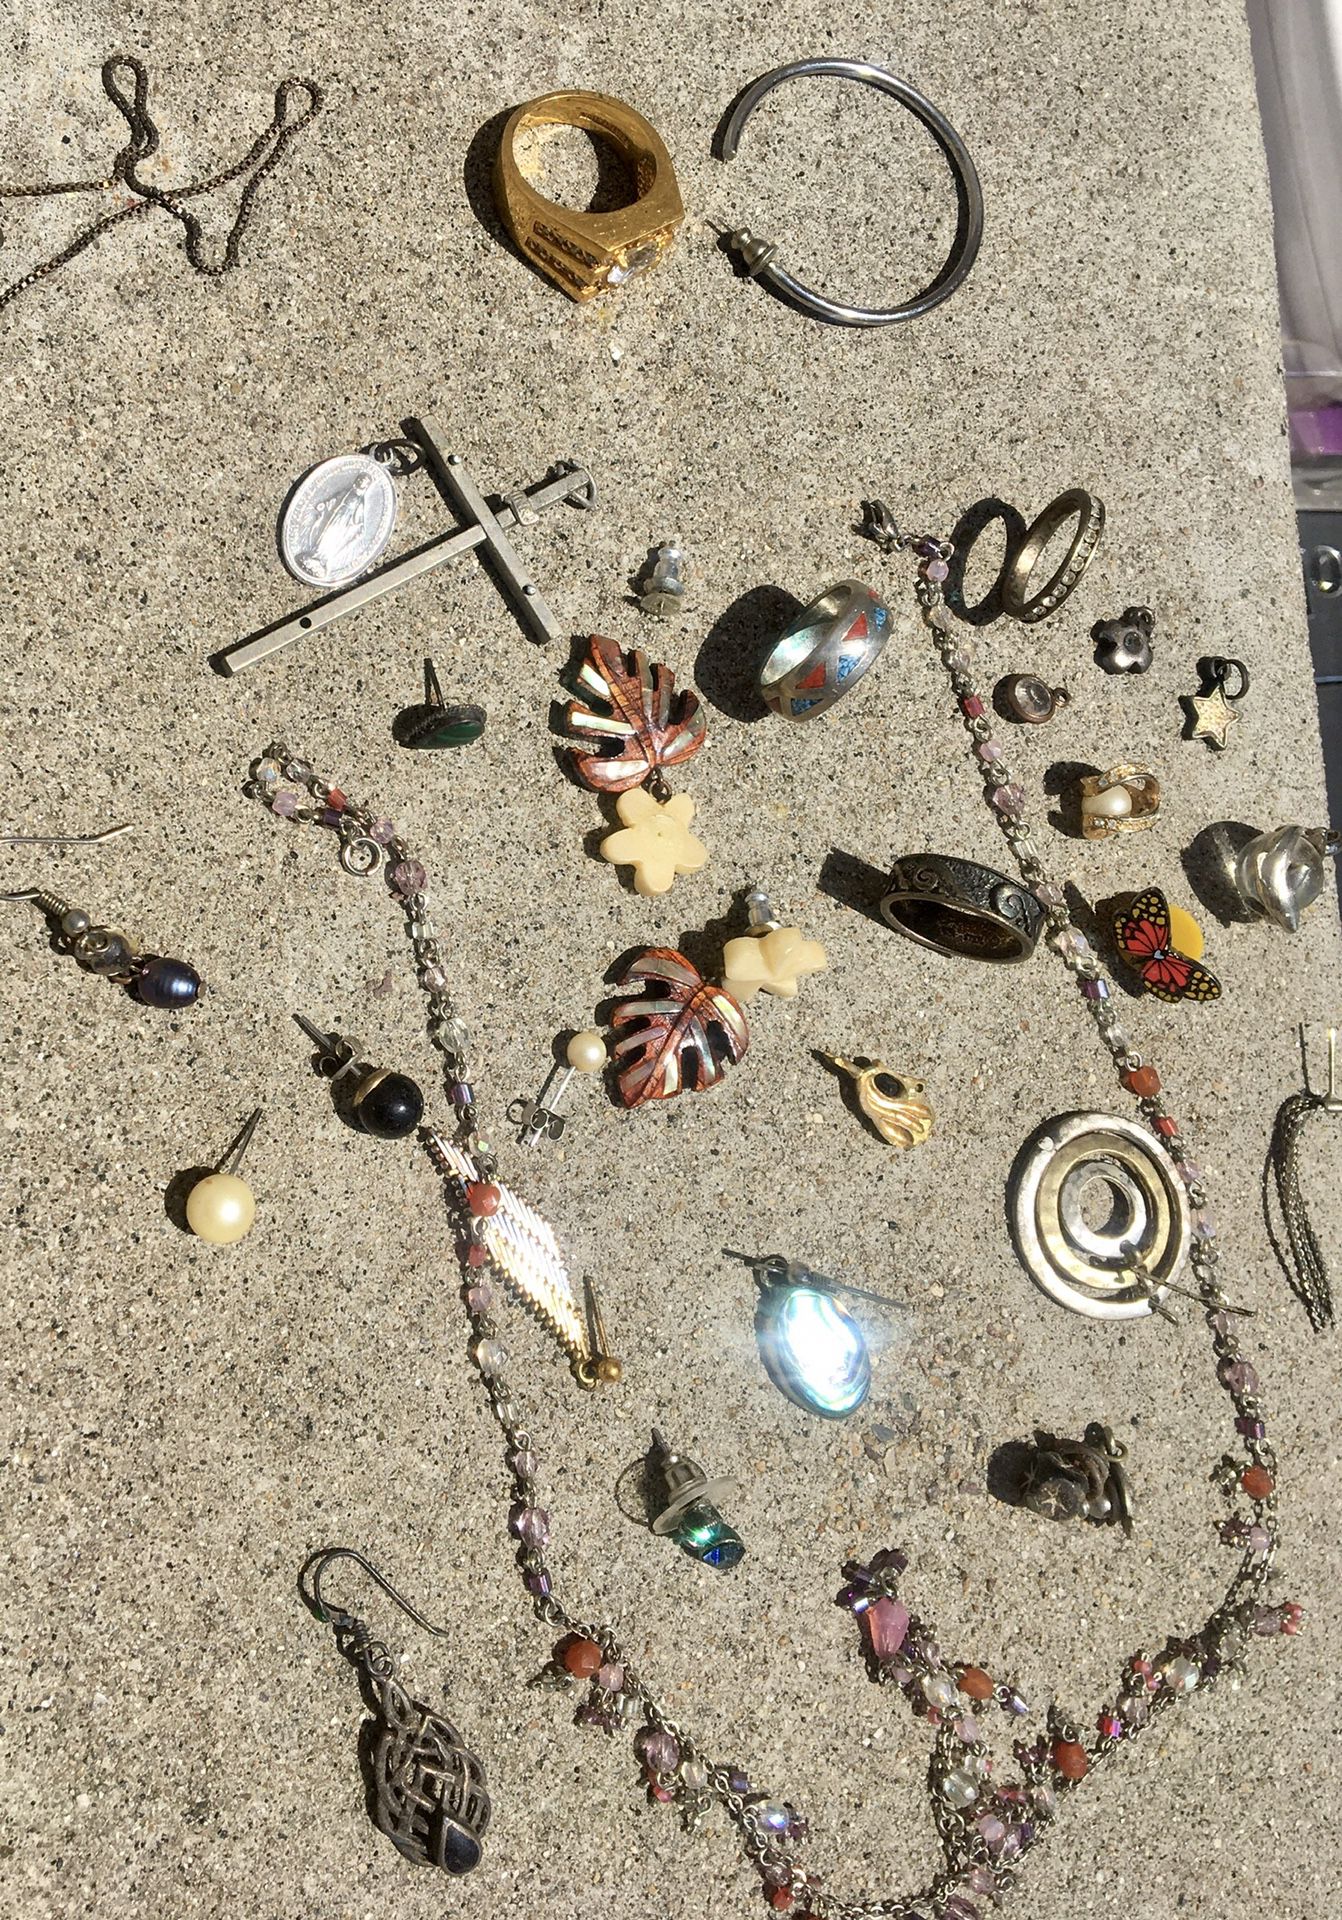 Lot of Charms, single earrings, jewelry pieces, rings